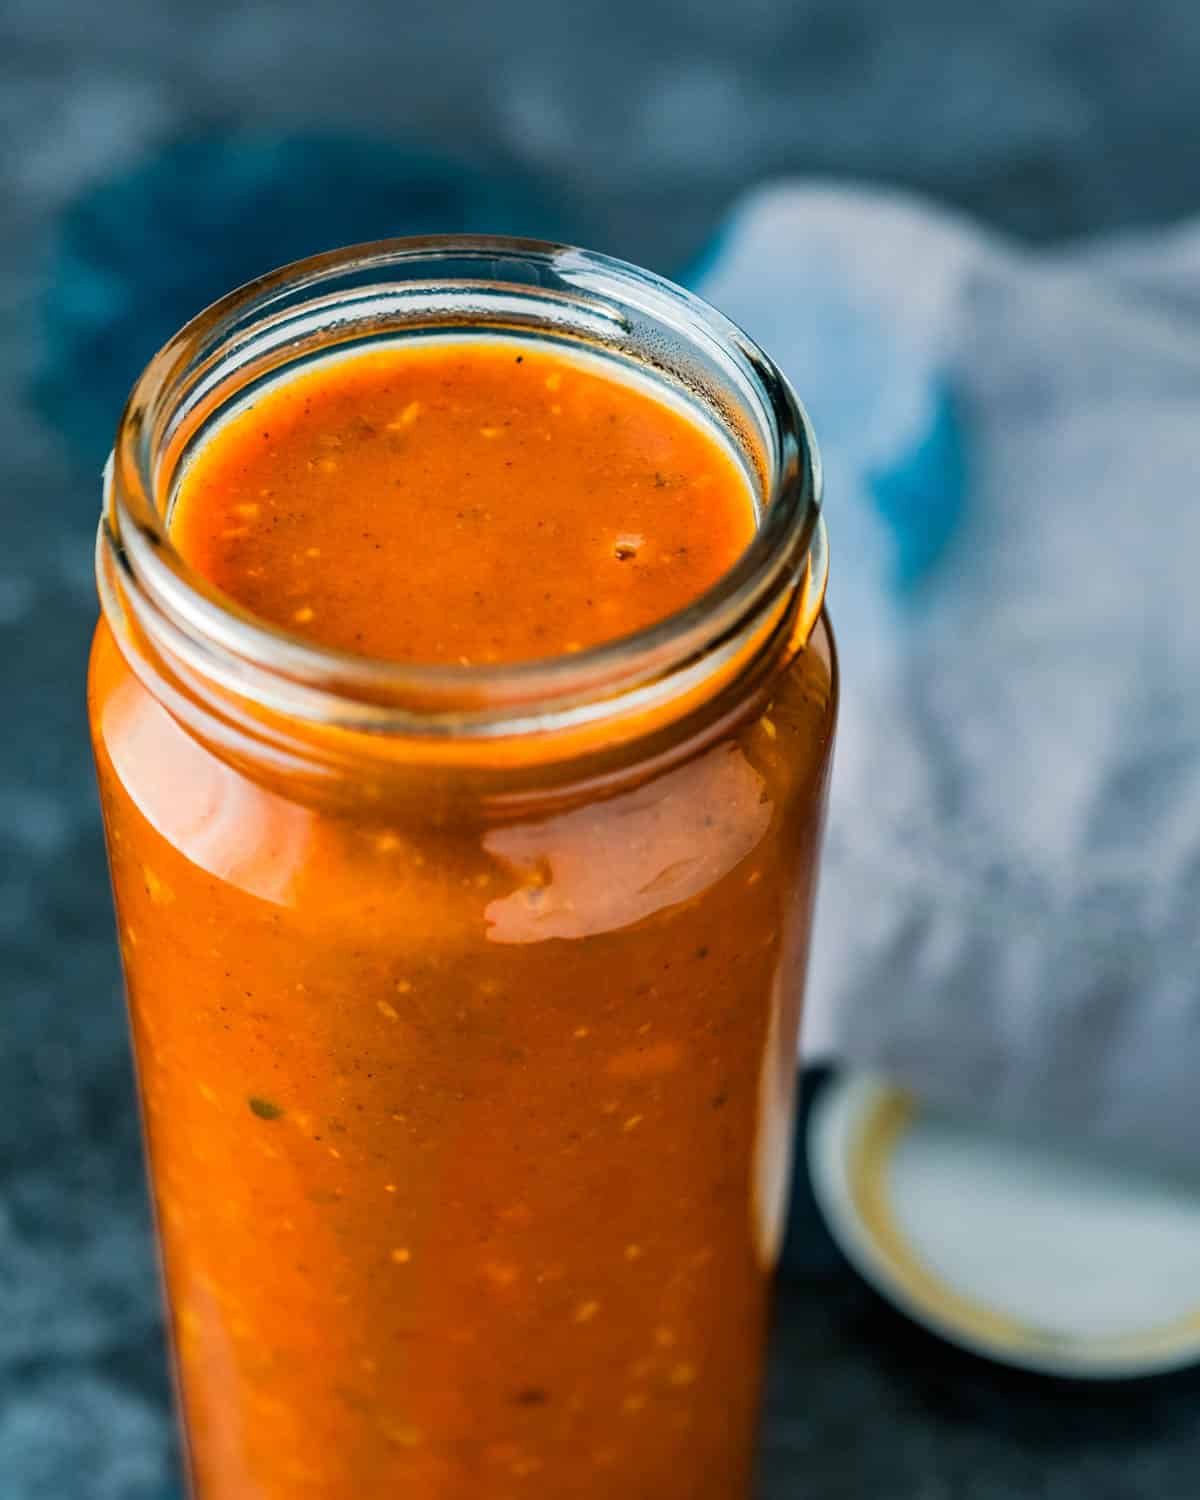 Storing the red enchilada sauce in a jar.